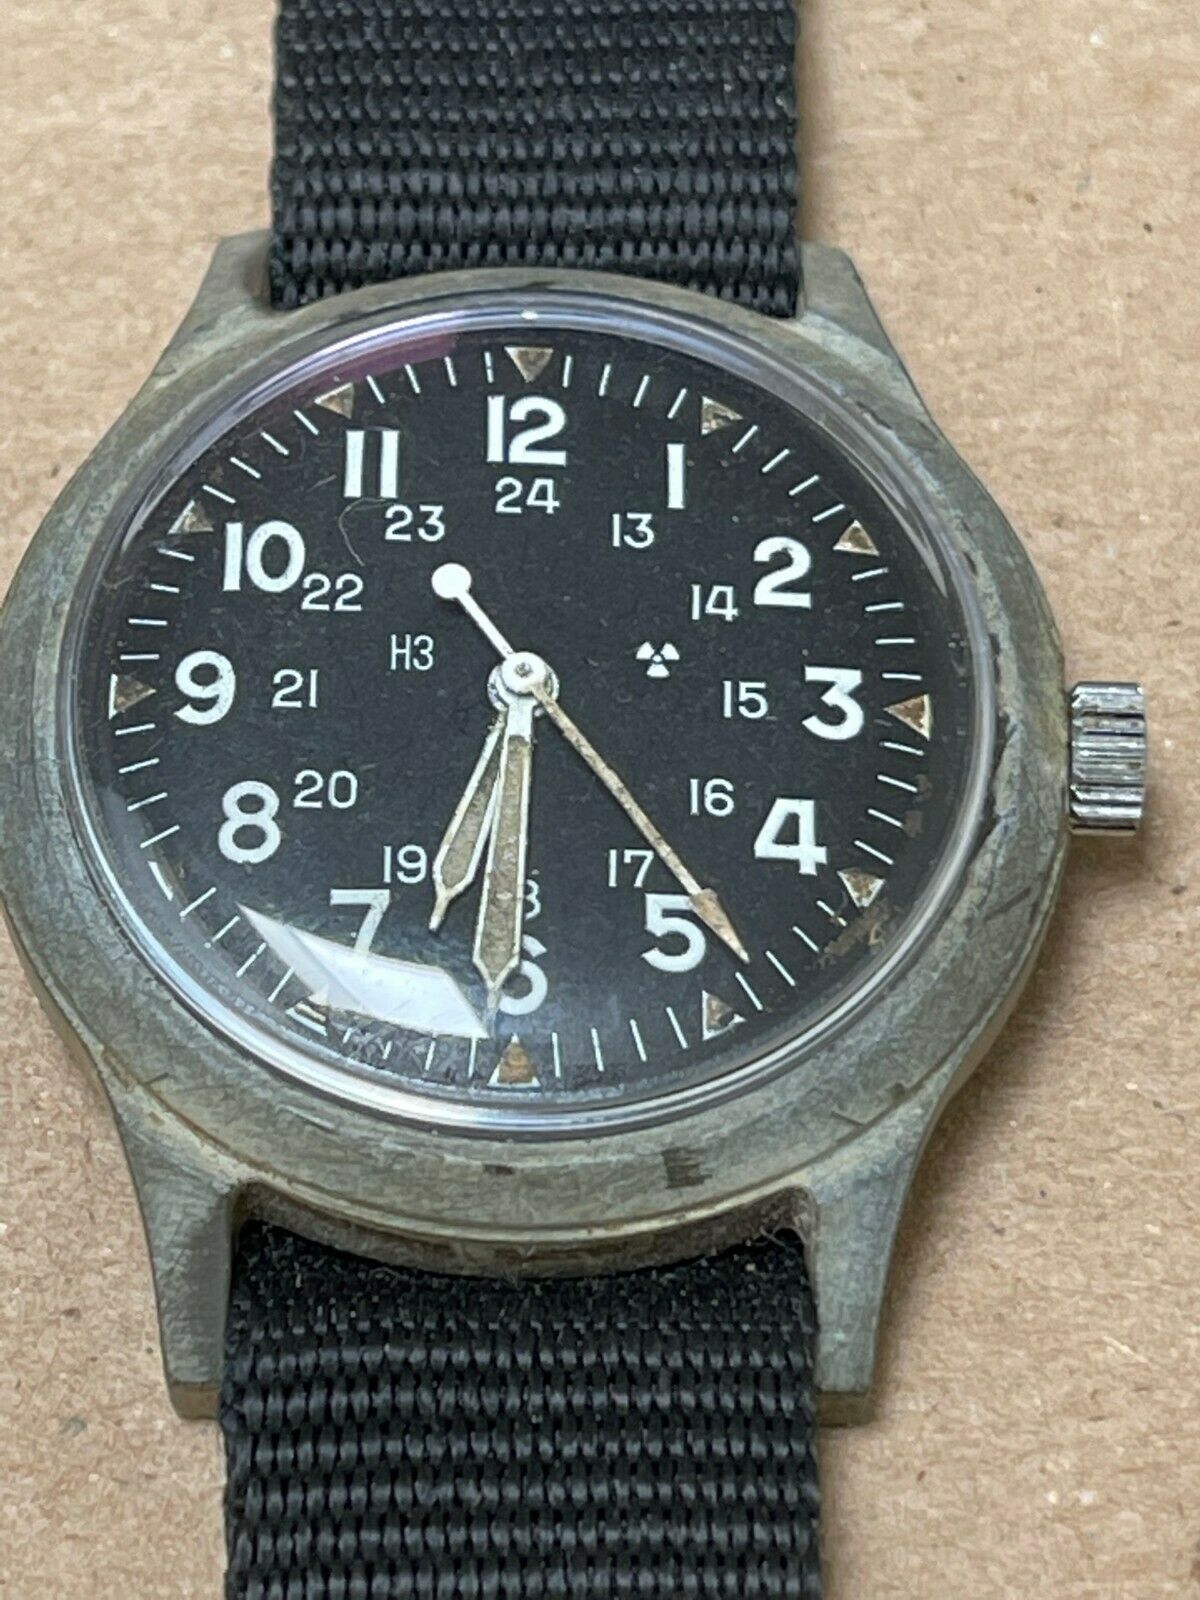 Vintage Benrus MIL-W-46374 A US Military Watch March 1975 Vietnam